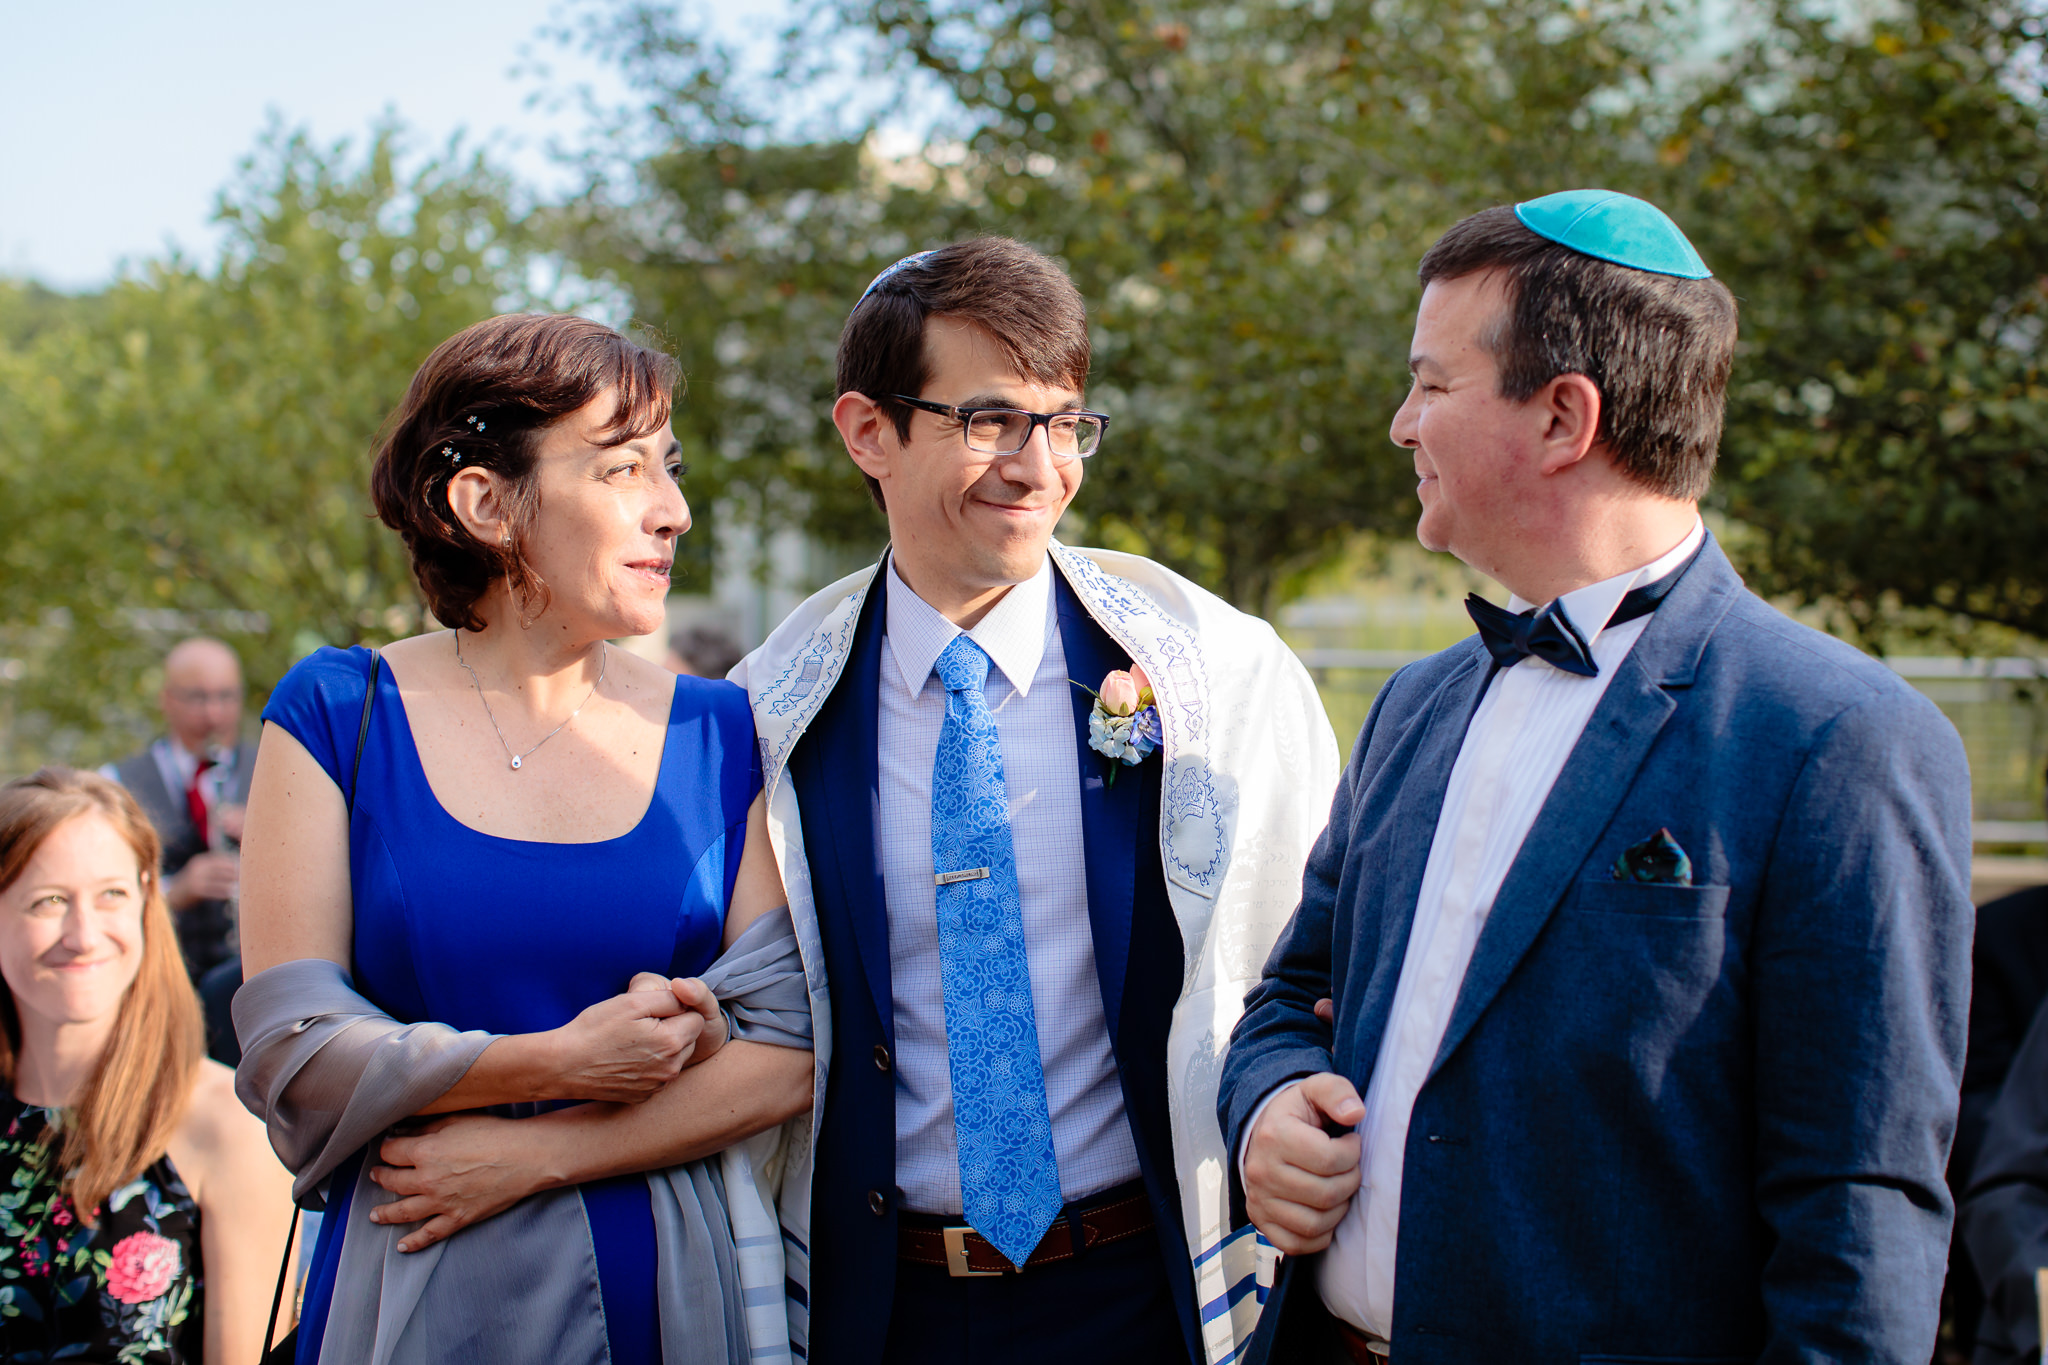 Parents of the groom smile at the groom before a Jewish wedding ceremony at Phipps Conservatory